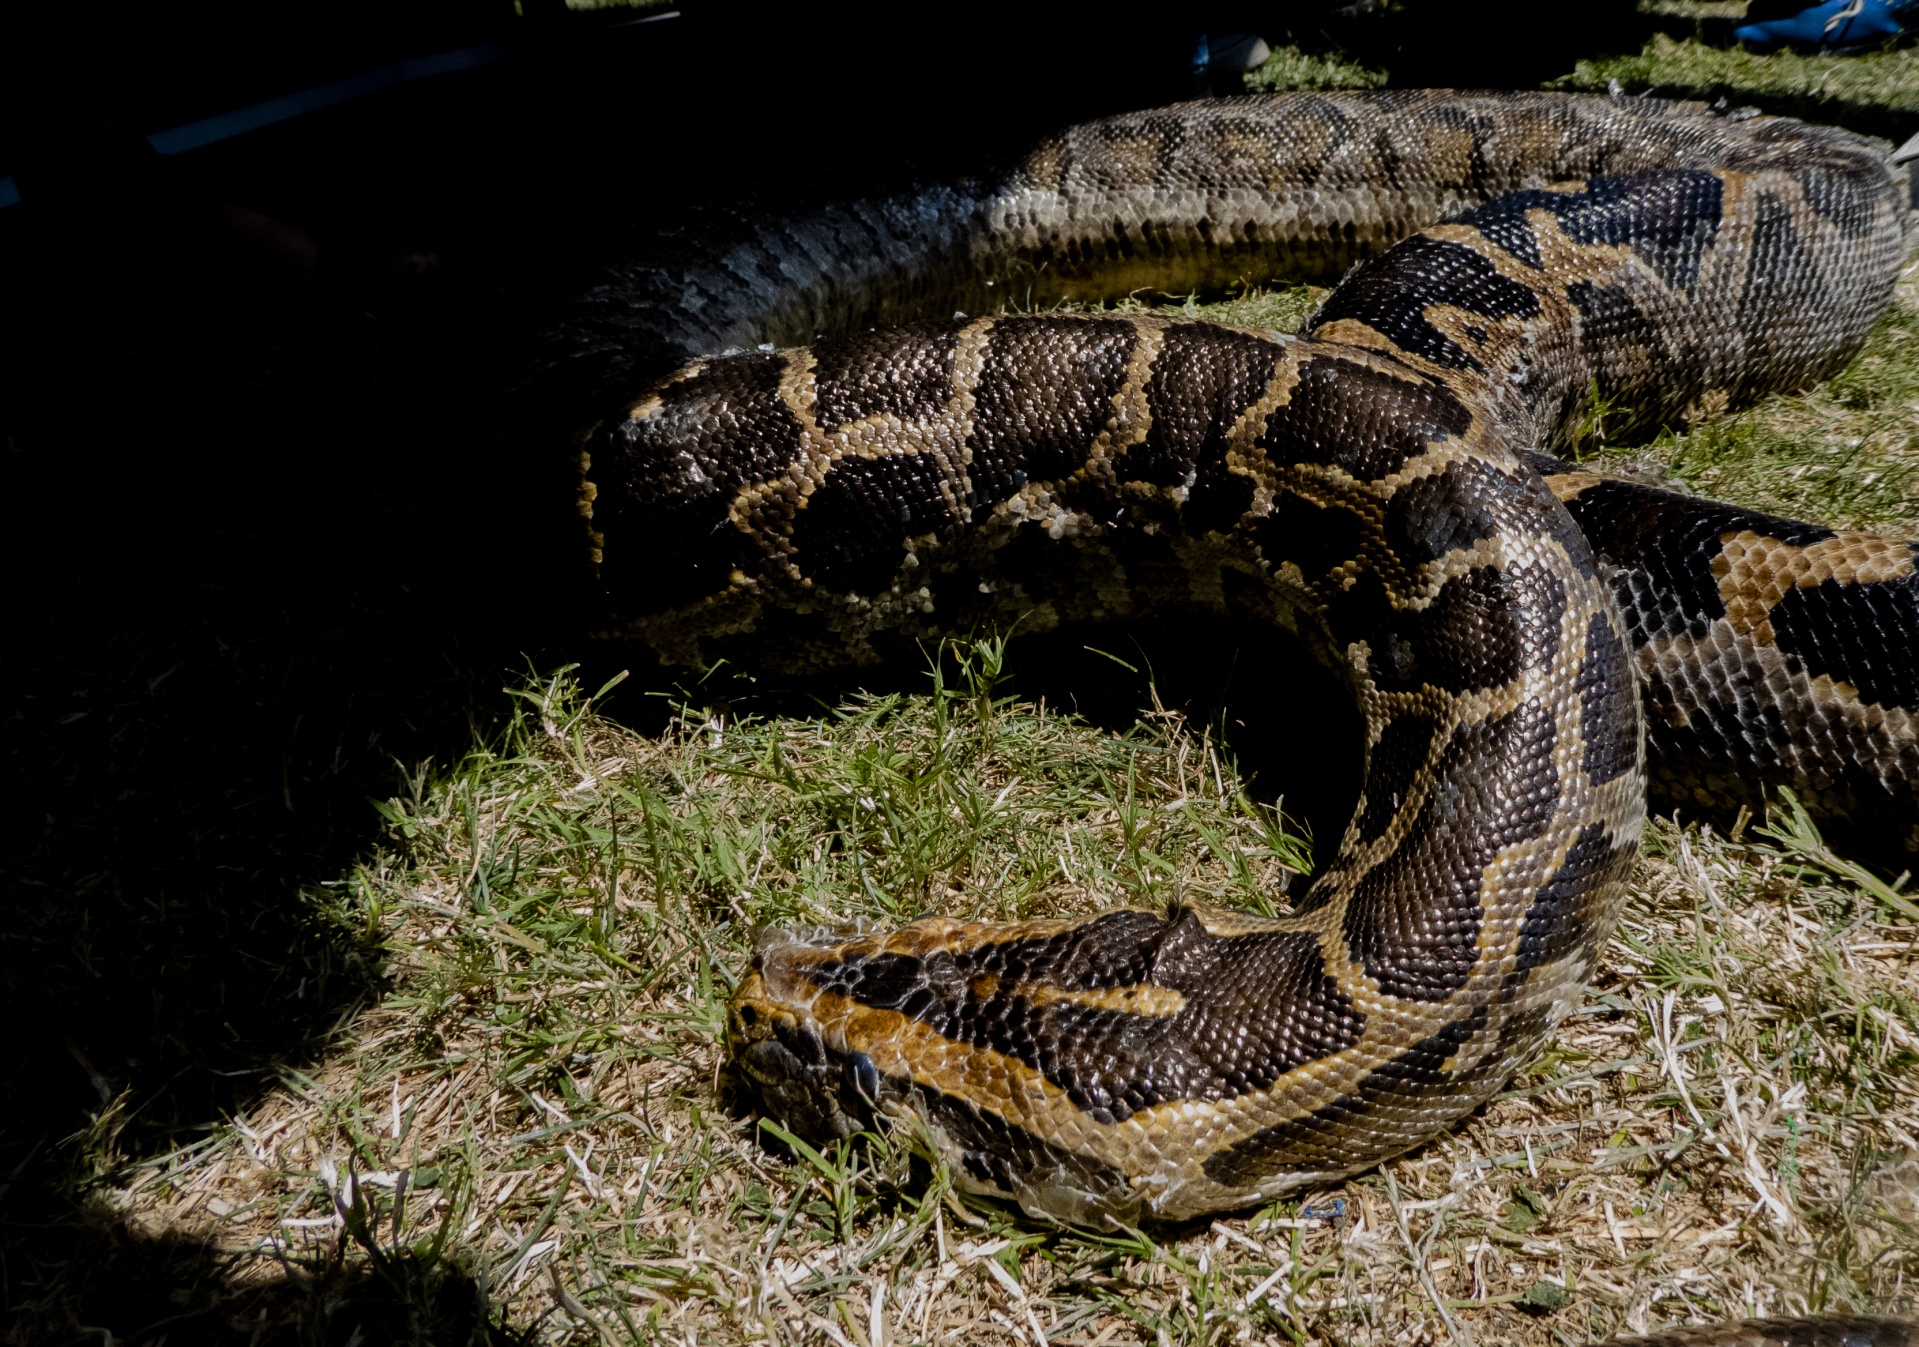 30 Year old Python warming itself in the grass